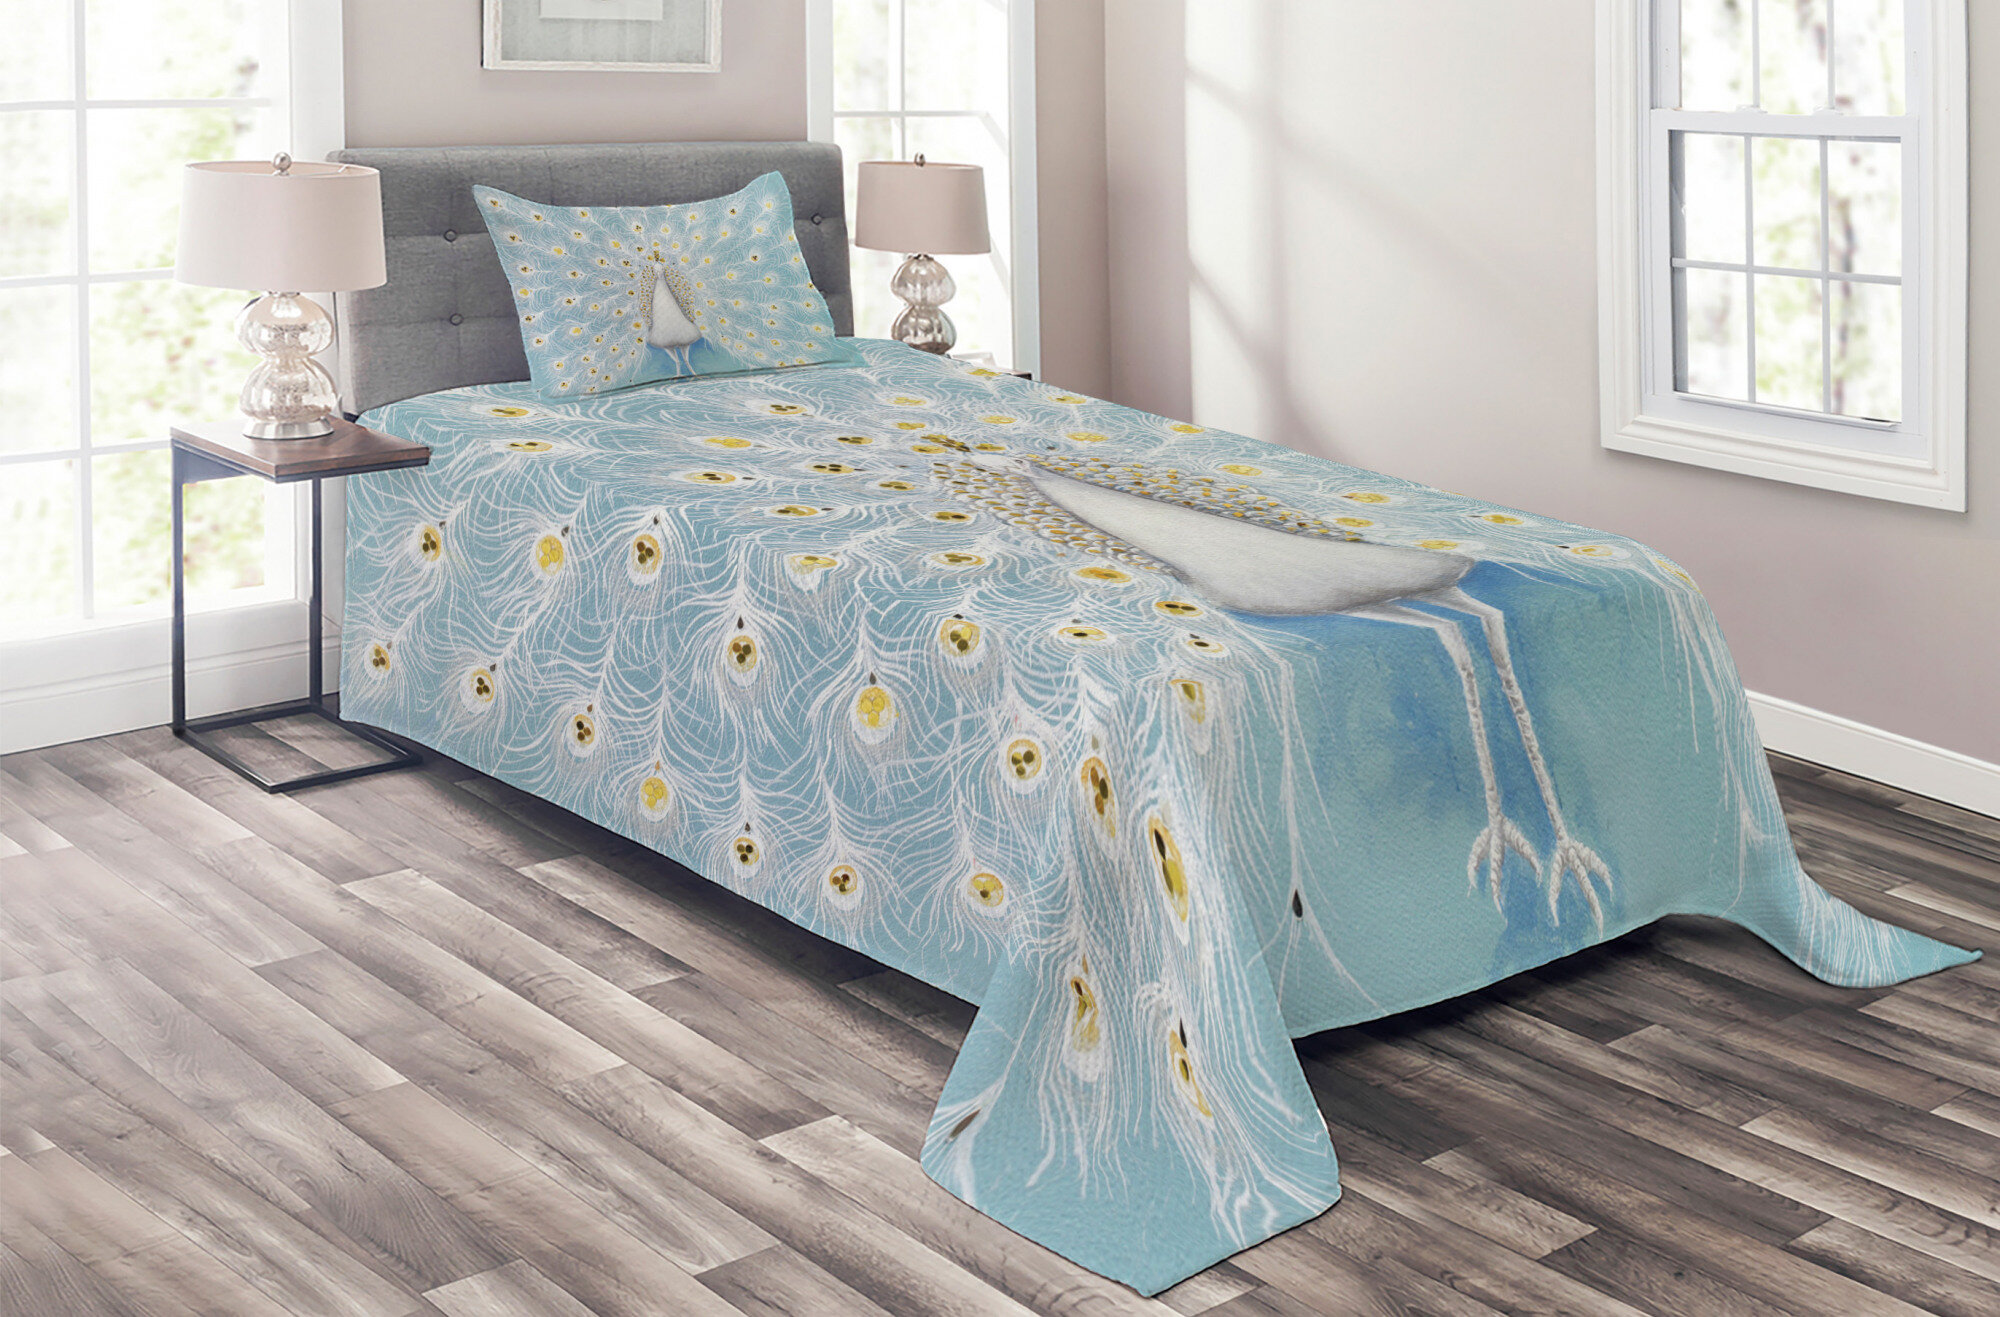 Bless international Peacock Sky Blue/Yellow Microfiber Eclectic Coverlet /  Bedspread Set